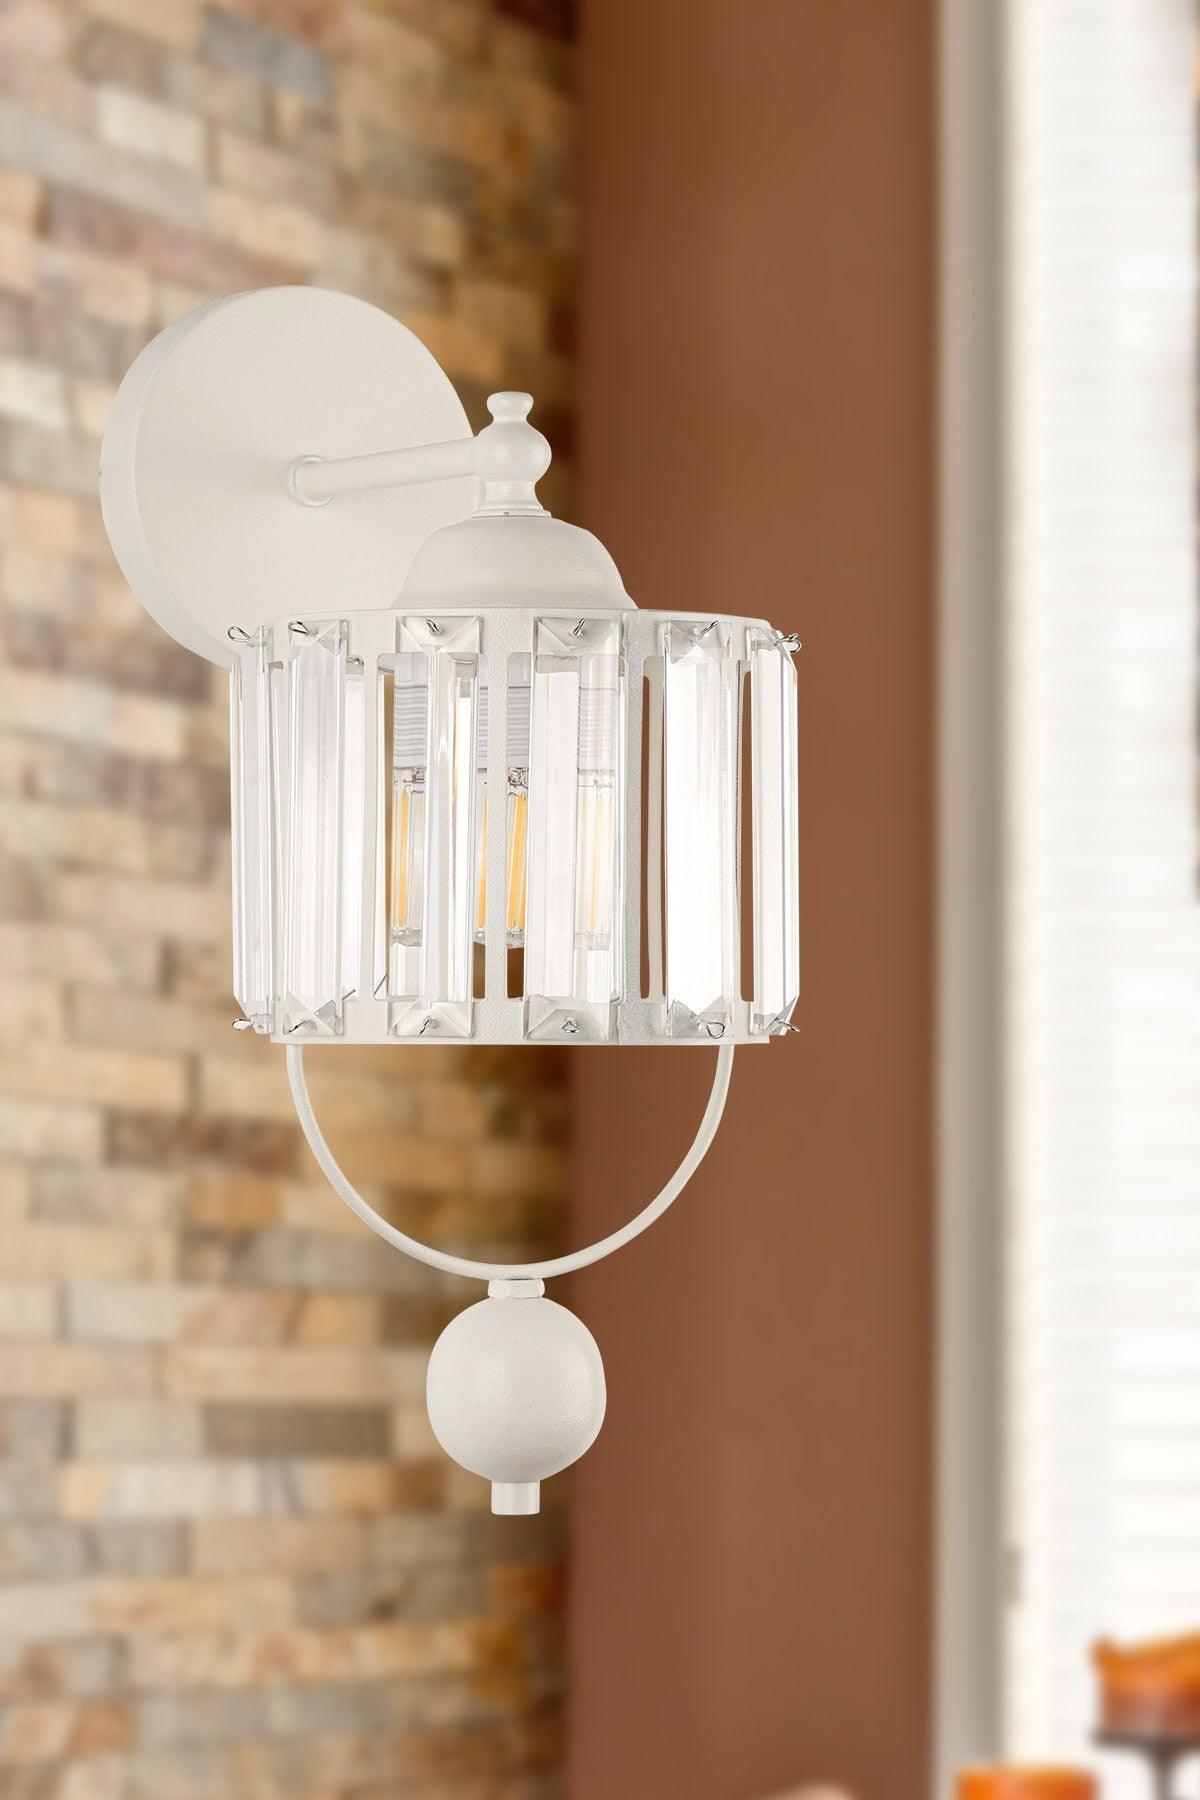 Gallon Wall Sconce Lux Crystal White - Swordslife